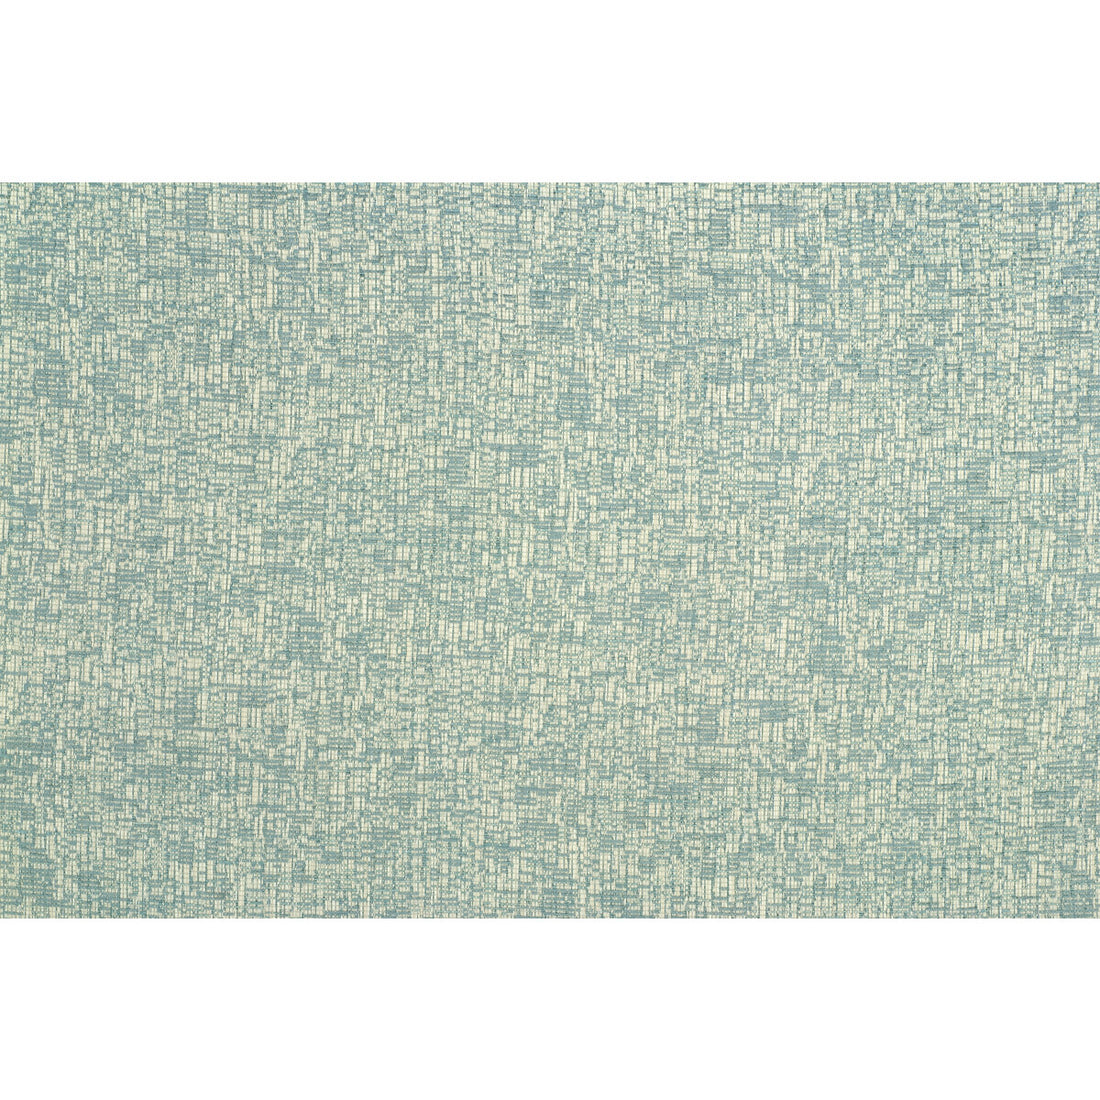 Kravet Contract fabric in 34737-15 color - pattern 34737.15.0 - by Kravet Contract in the Crypton Incase collection